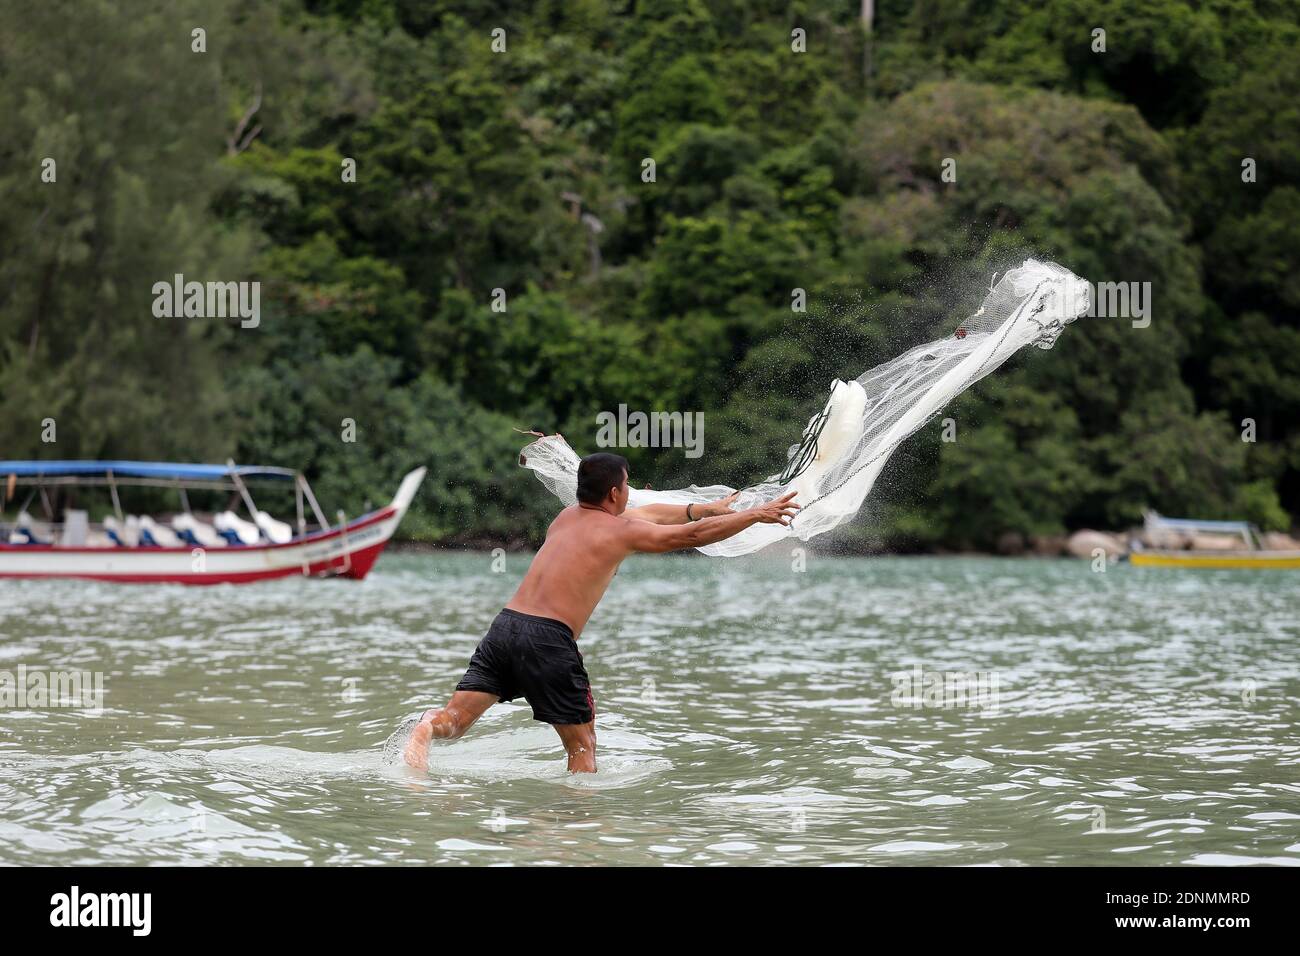 https://c8.alamy.com/comp/2DNMMRD/fisher-man-throwing-fishing-net-for-catching-fish-for-food-2DNMMRD.jpg